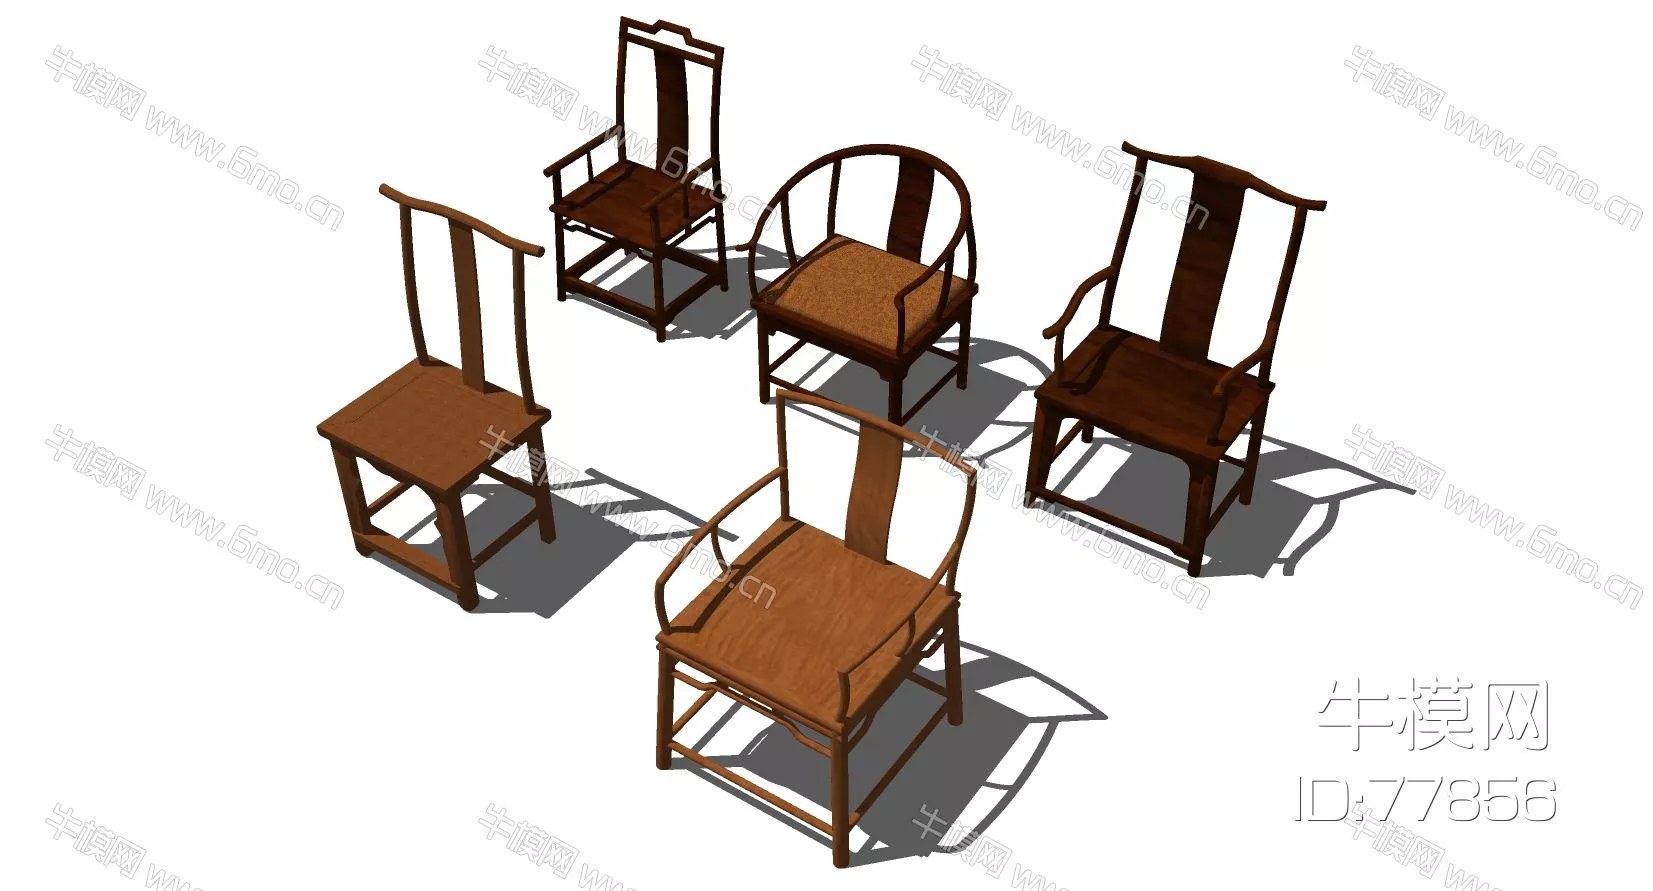 CHINESE LOUNGLE CHAIR - SKETCHUP 3D MODEL - ENSCAPE - 77856